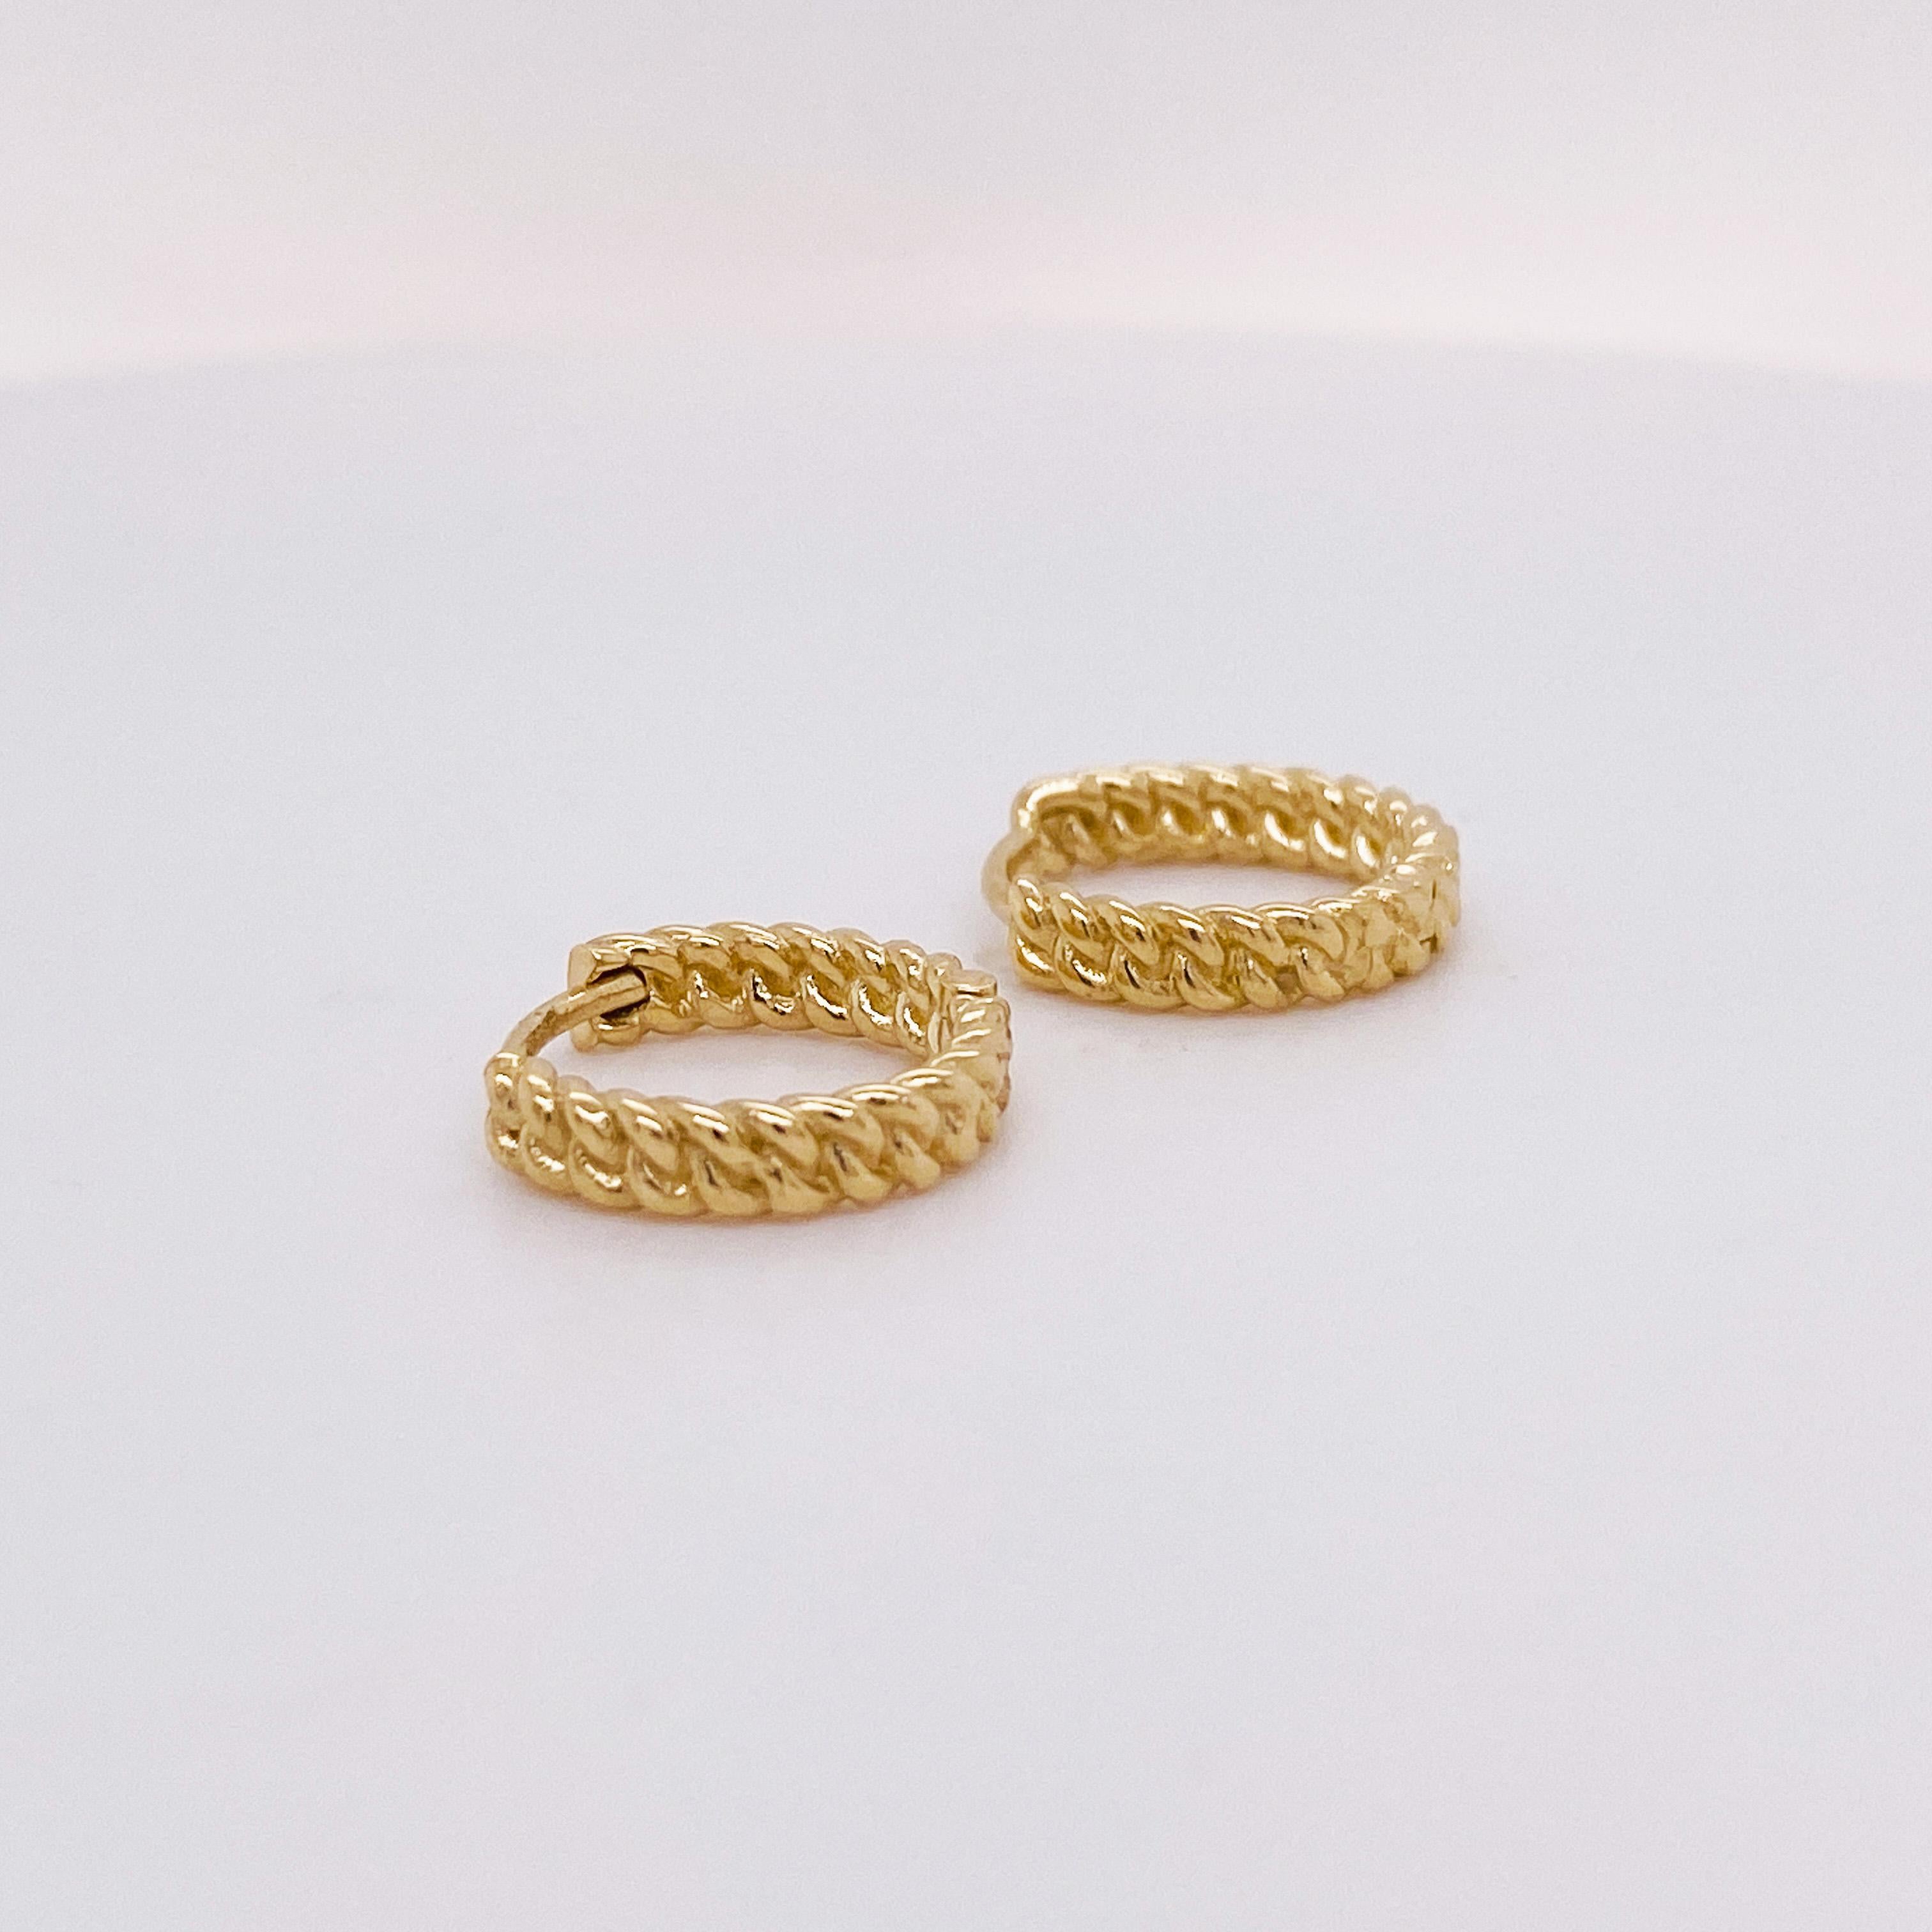 Contemporary Petite Braided Huggie Hoops, 13 Mm in 14Karat Yellow Gold, Invisible Hinge LV For Sale